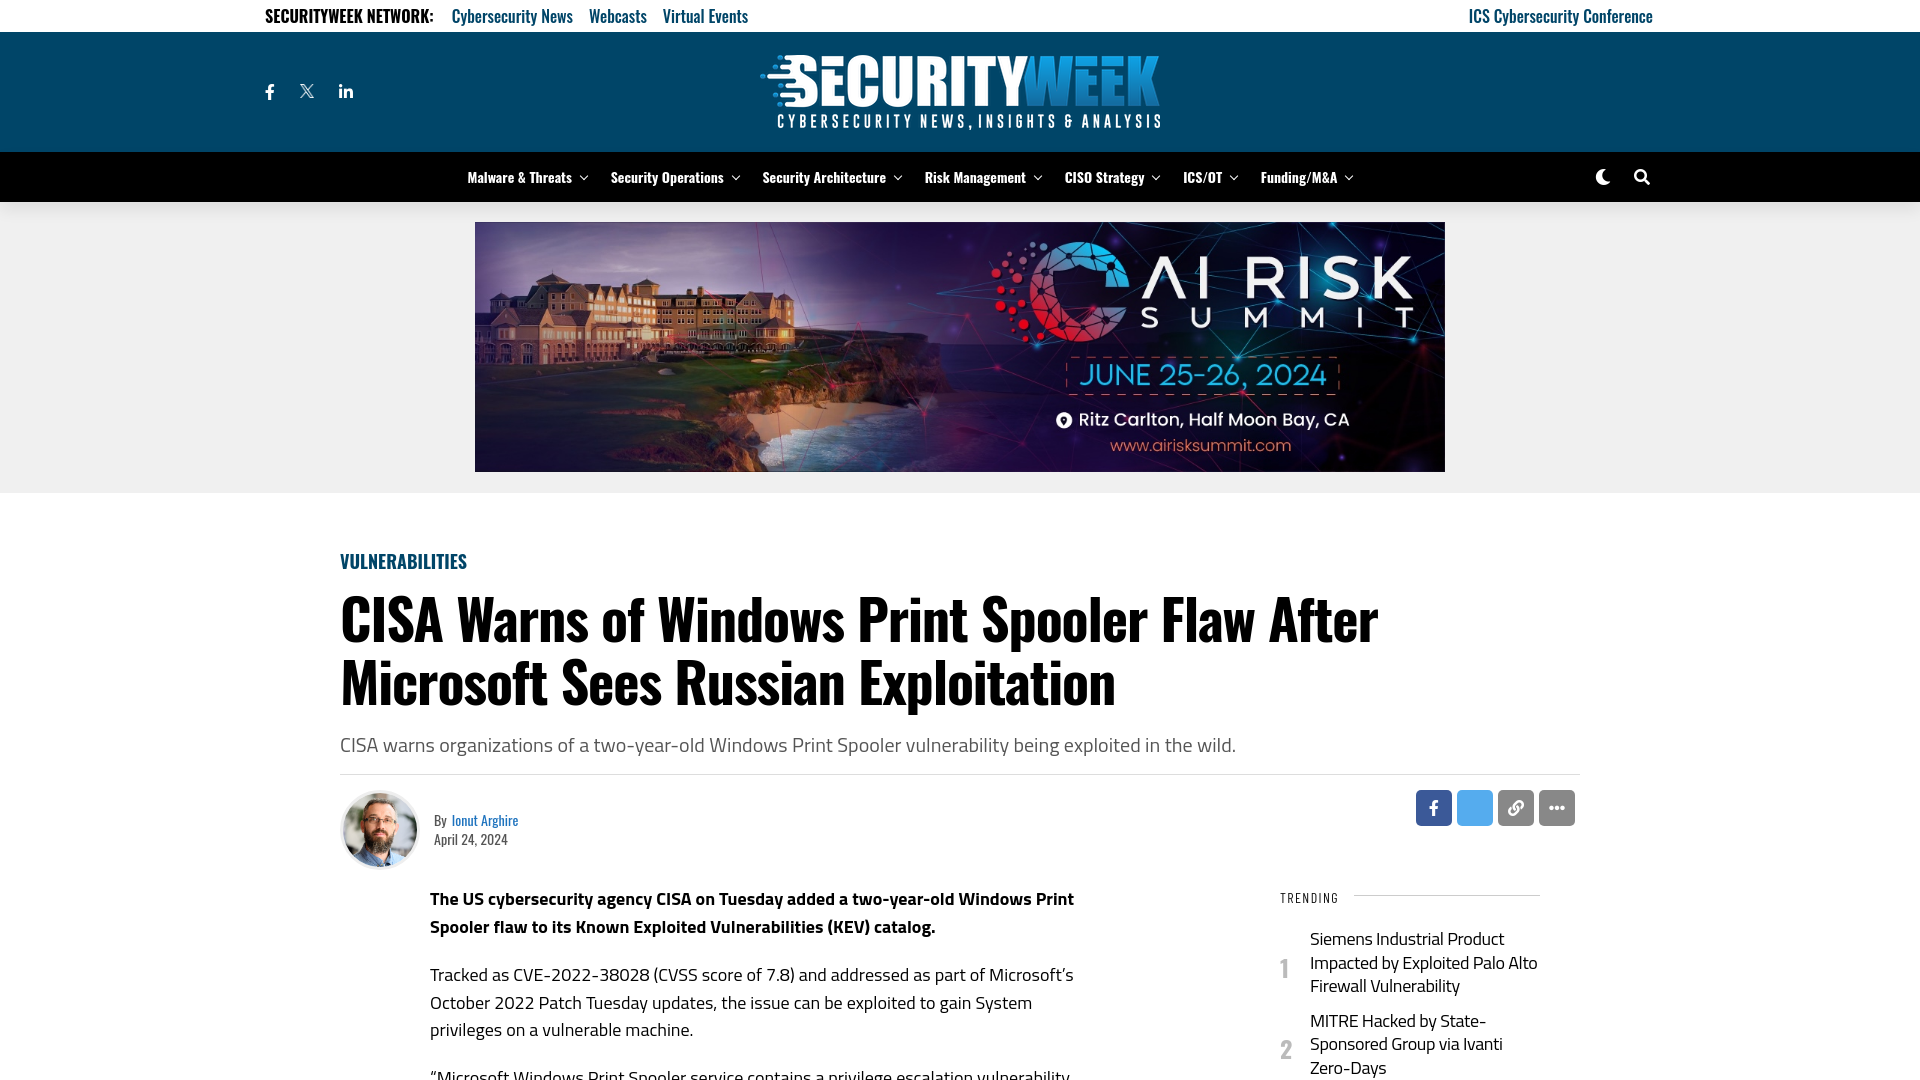 CISA Warns of Windows Print Spooler Flaw After Microsoft Sees Russian Exploitation - SecurityWeek